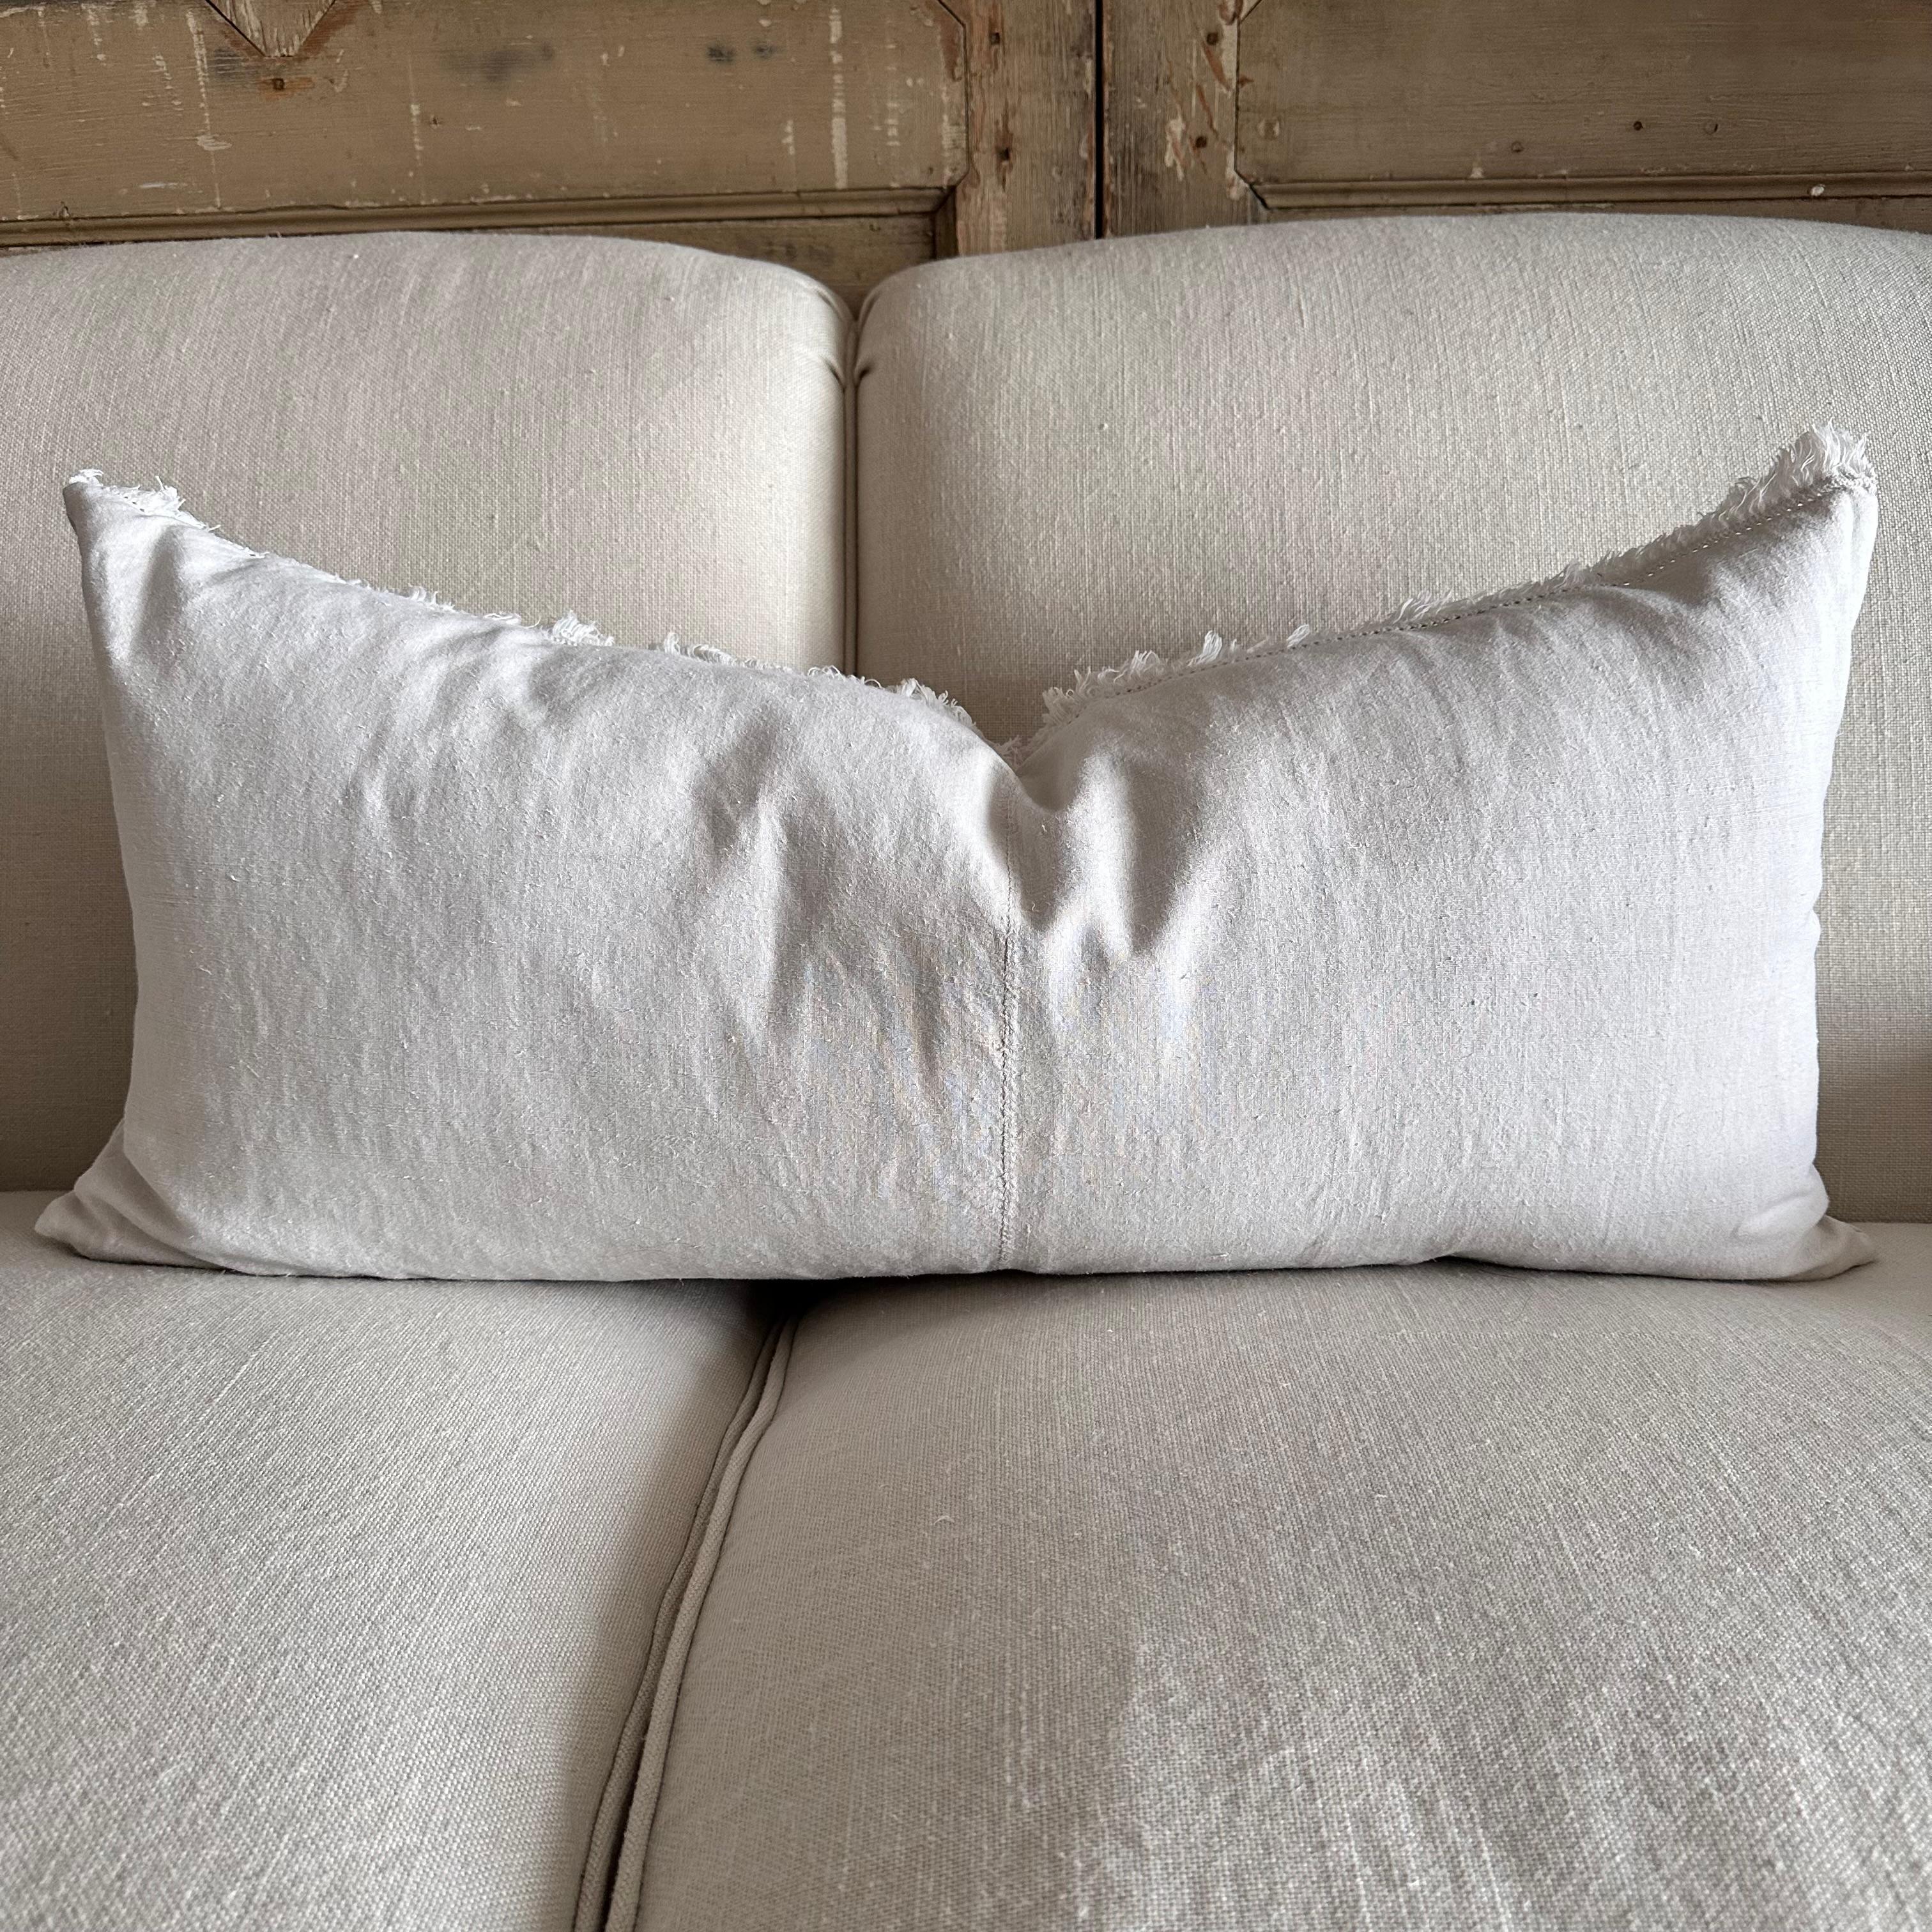 Antique French White Grain Linen Pillow with Insert For Sale 2